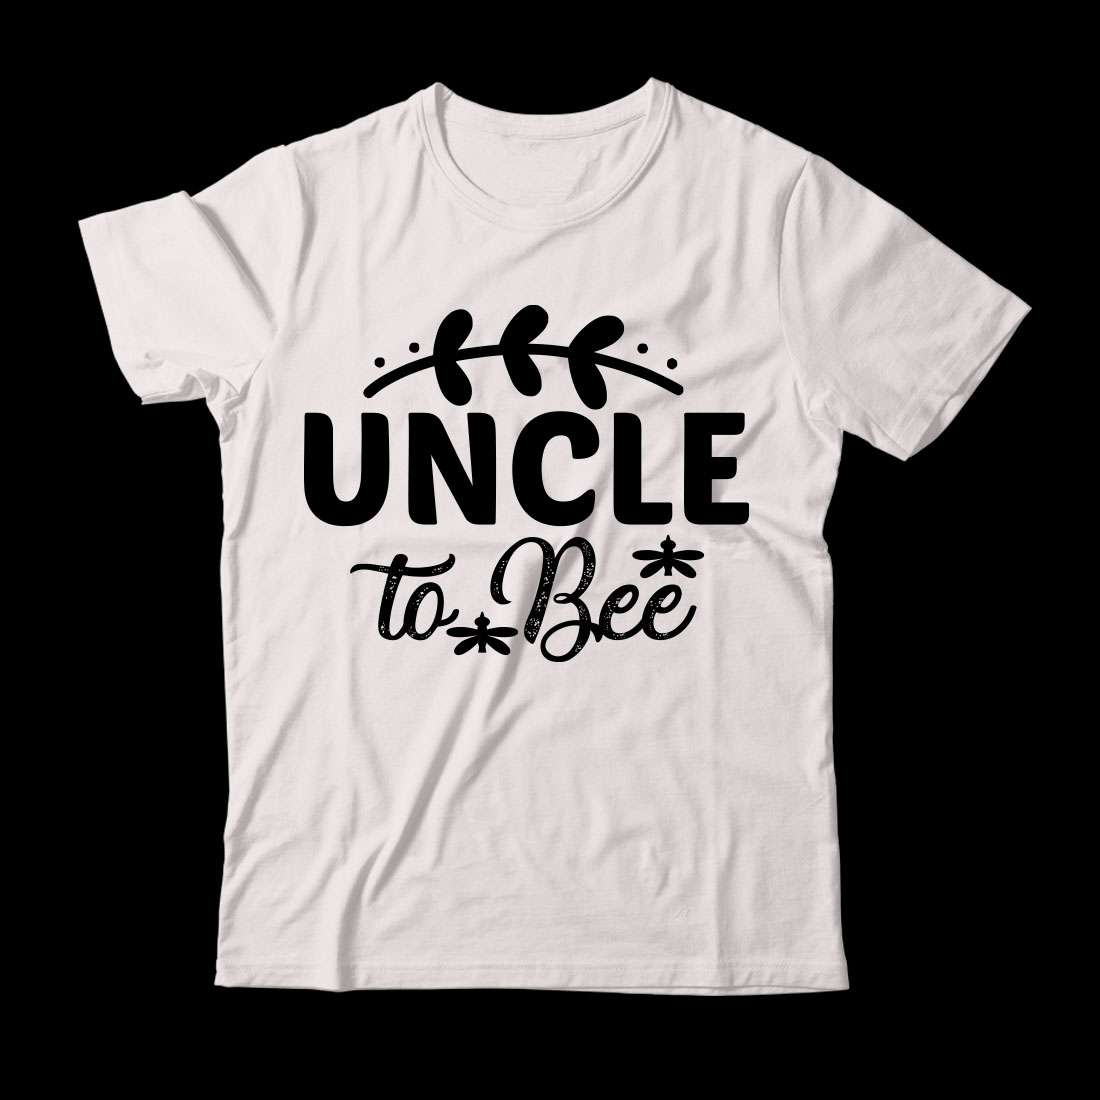 White t - shirt that says uncle to bee.